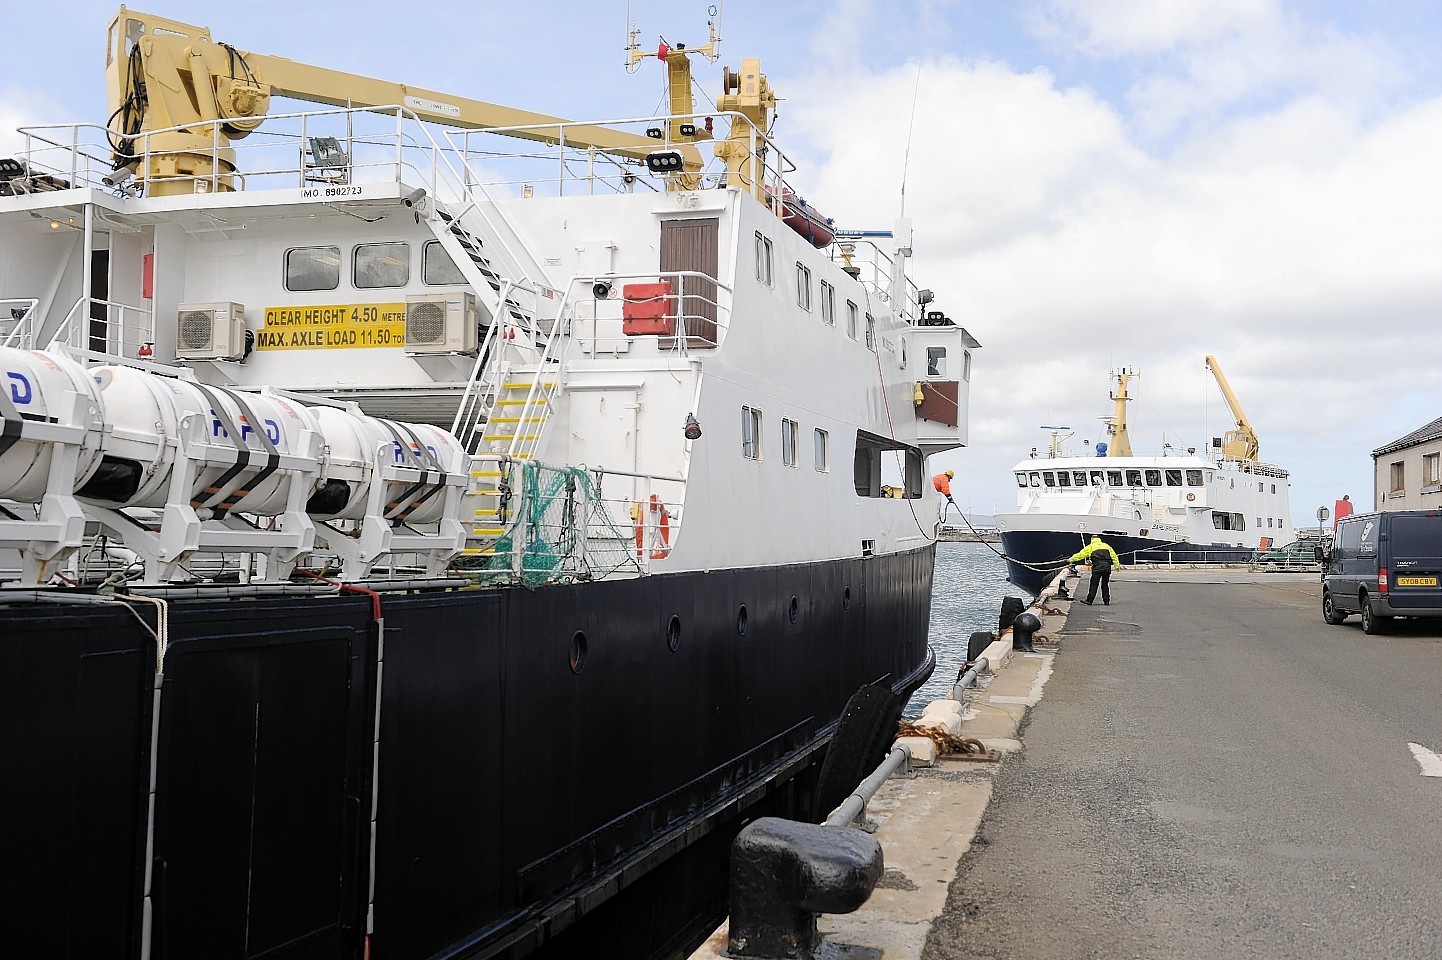 The shortfallhas emerged after Orkney Islands Council asked the Scottish Government for the required £6.8million funding to operate the interisland service between the Orkney mainland and 13 surrounding islands.